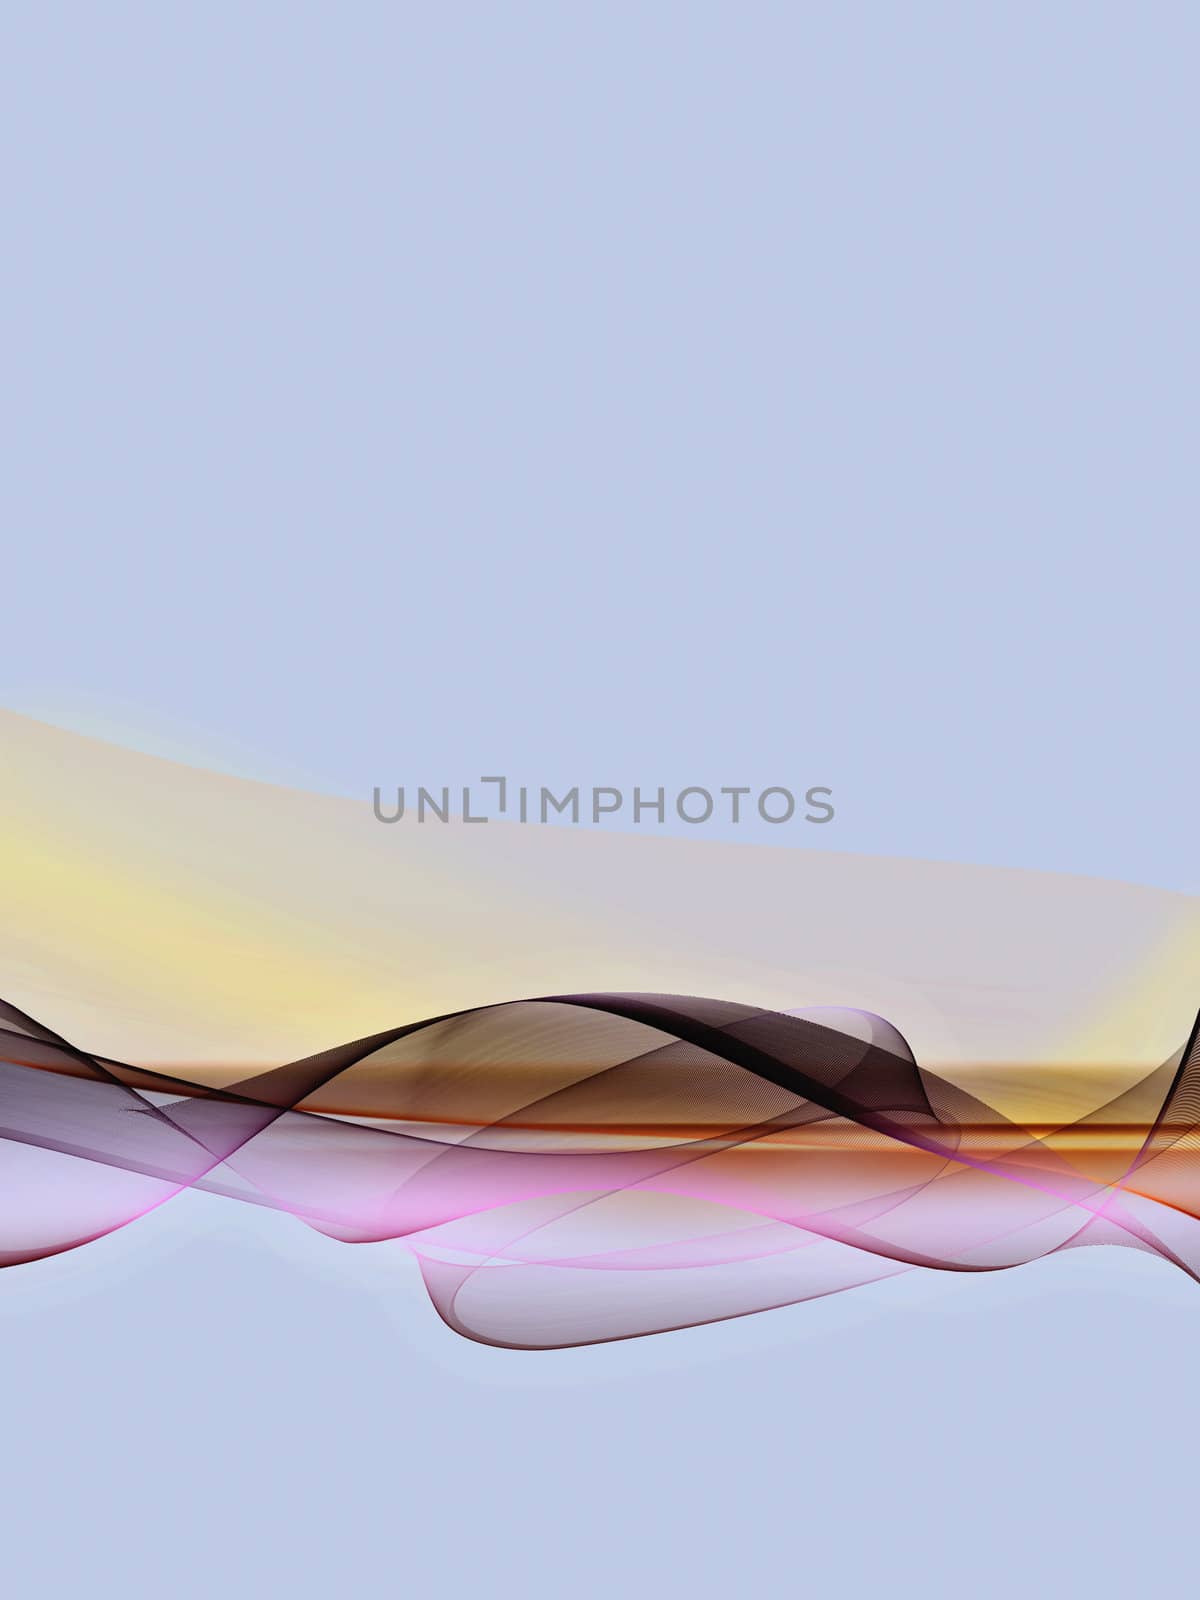 An abstract wallpaper isolated on light blue background